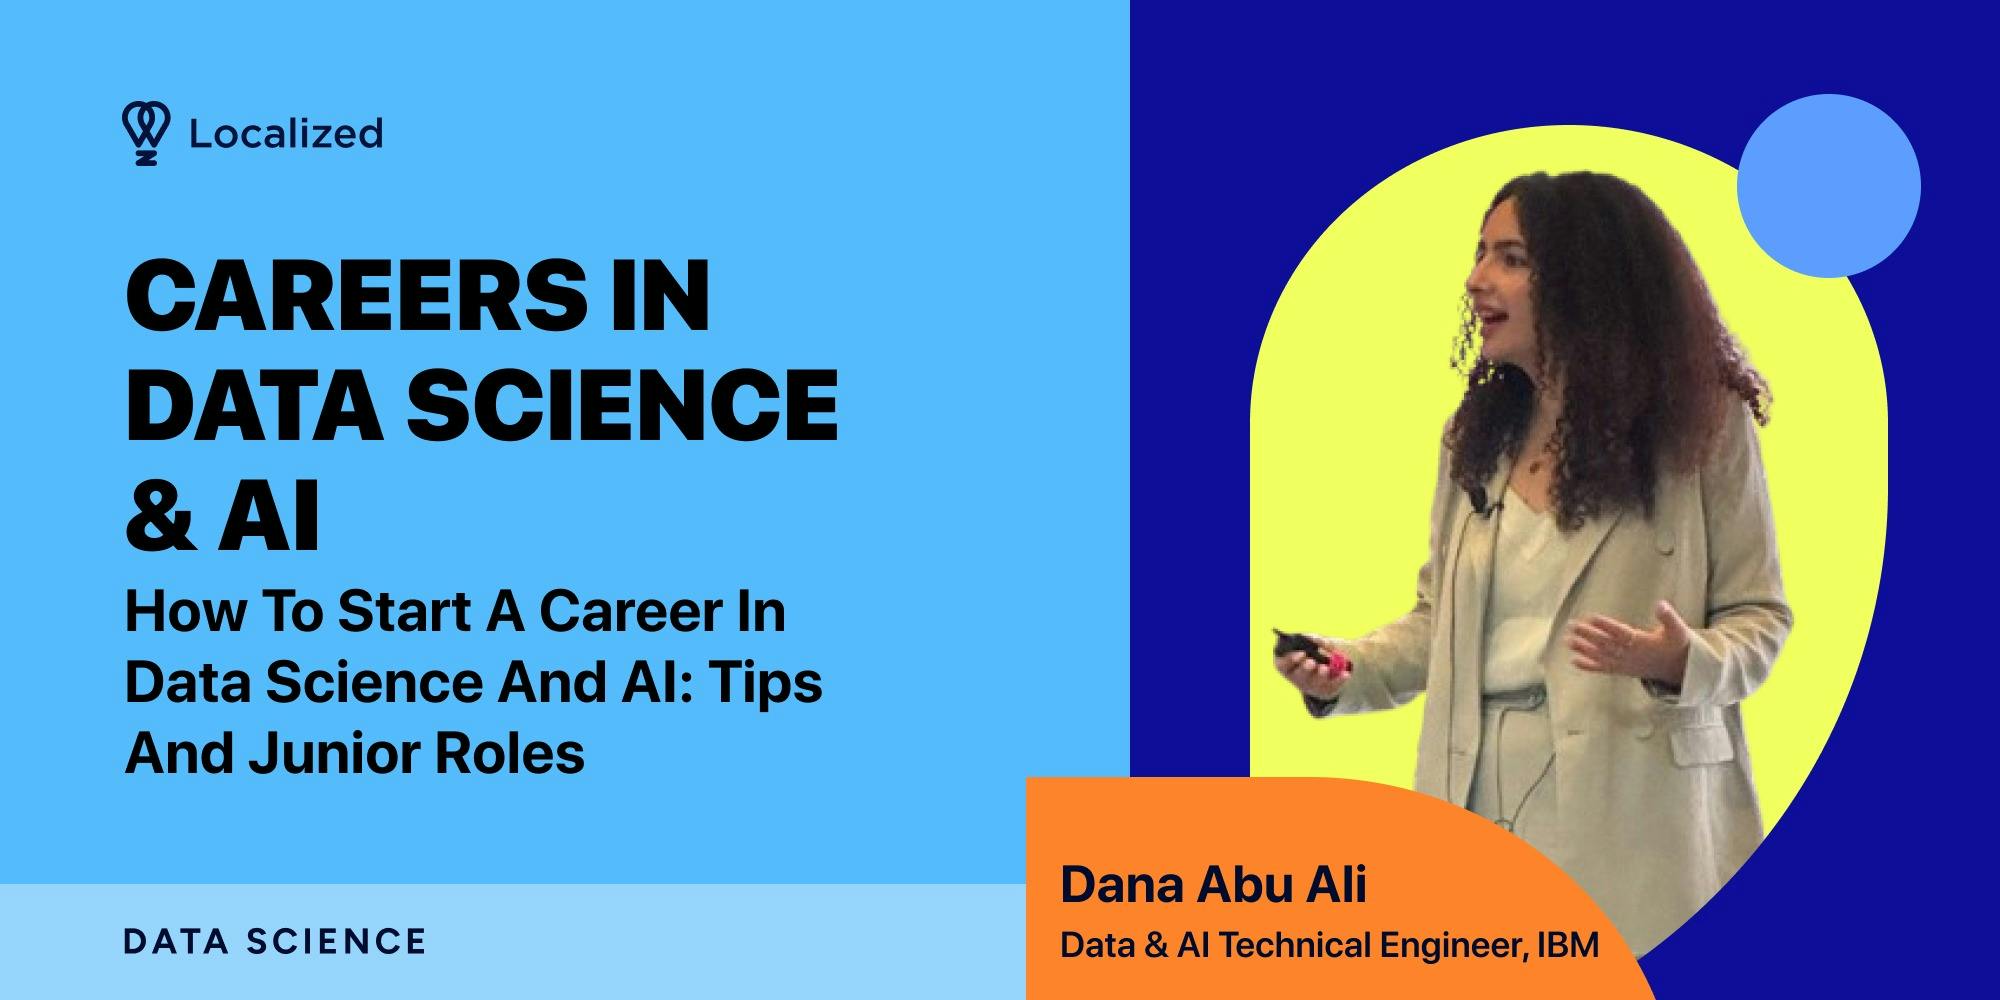 Careers in Data Science and AI: How To Start a Career In Data Science And AI - Tips and Junior Roles